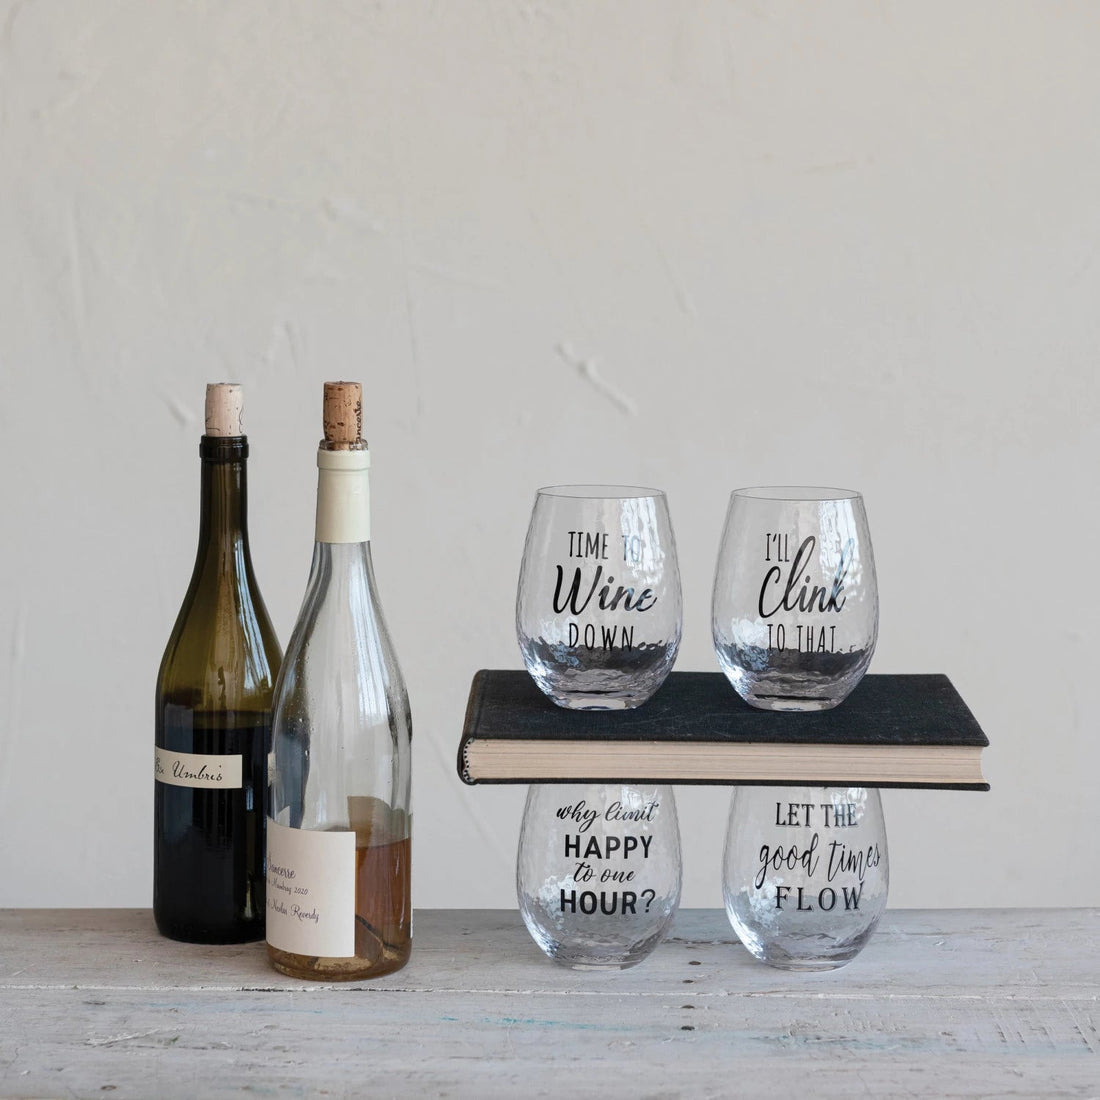 Meaningful Gifts for the Home Decor Lover